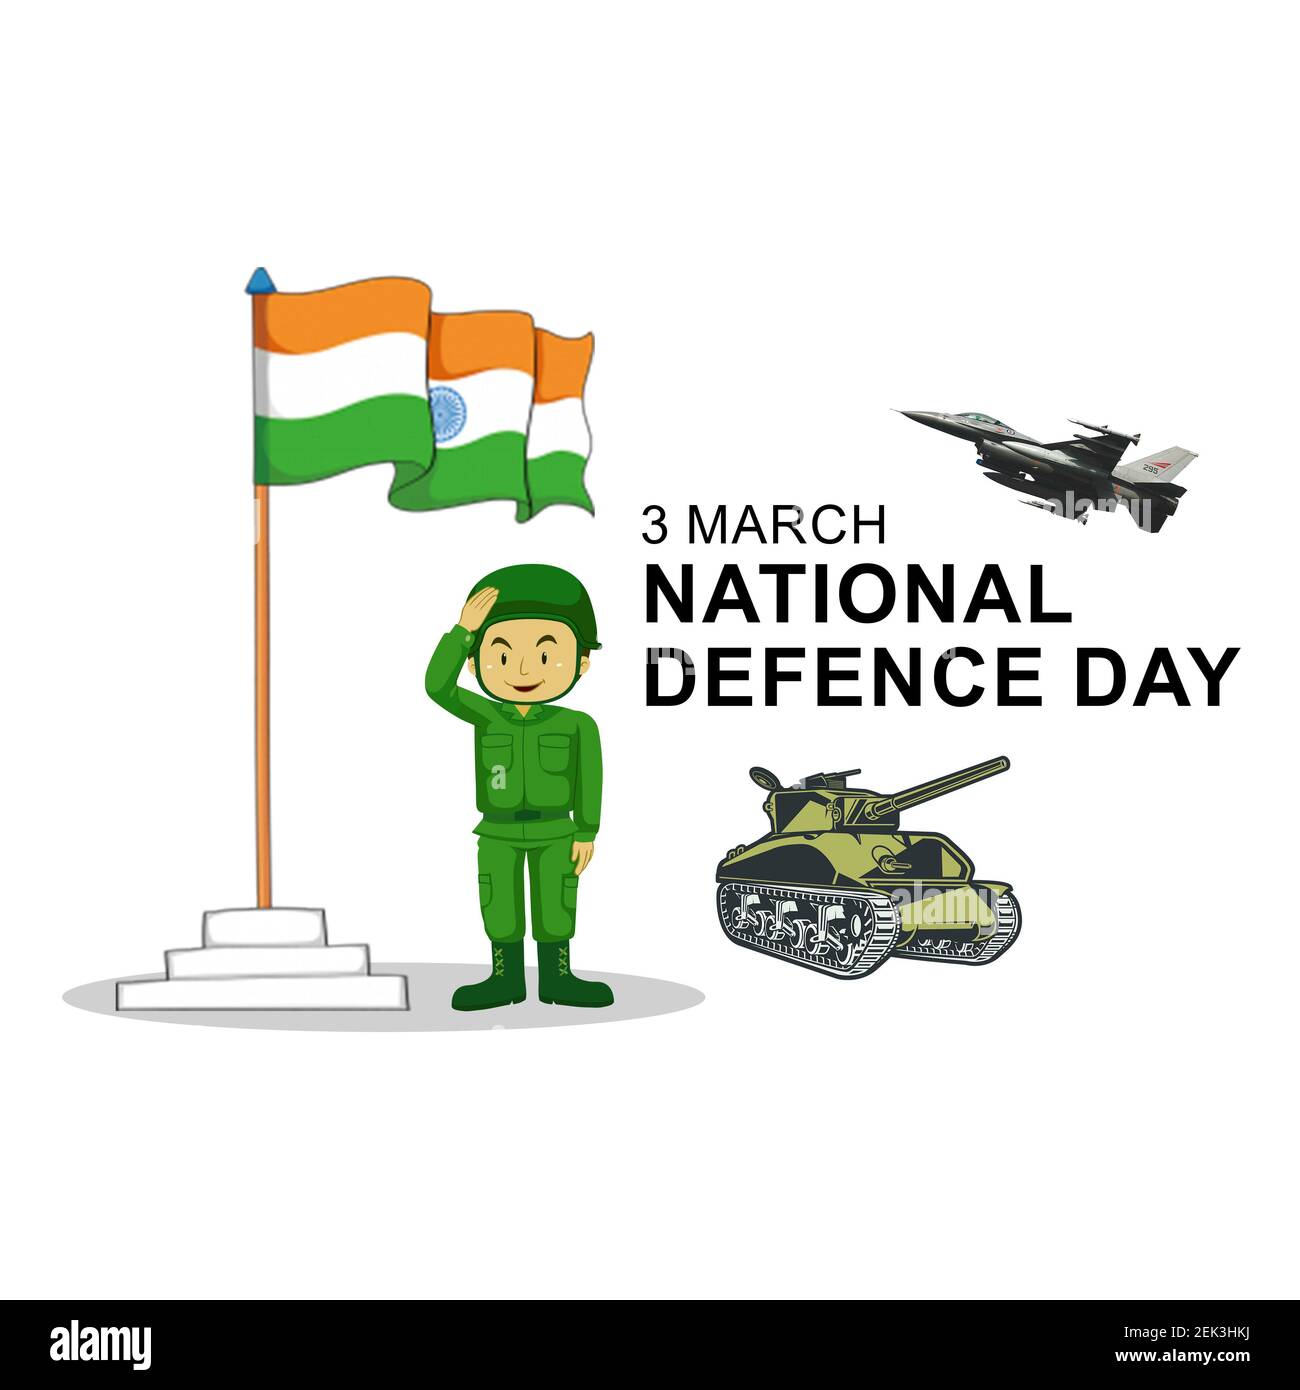 3rd March. Happy Defense Day India. Stock Photo